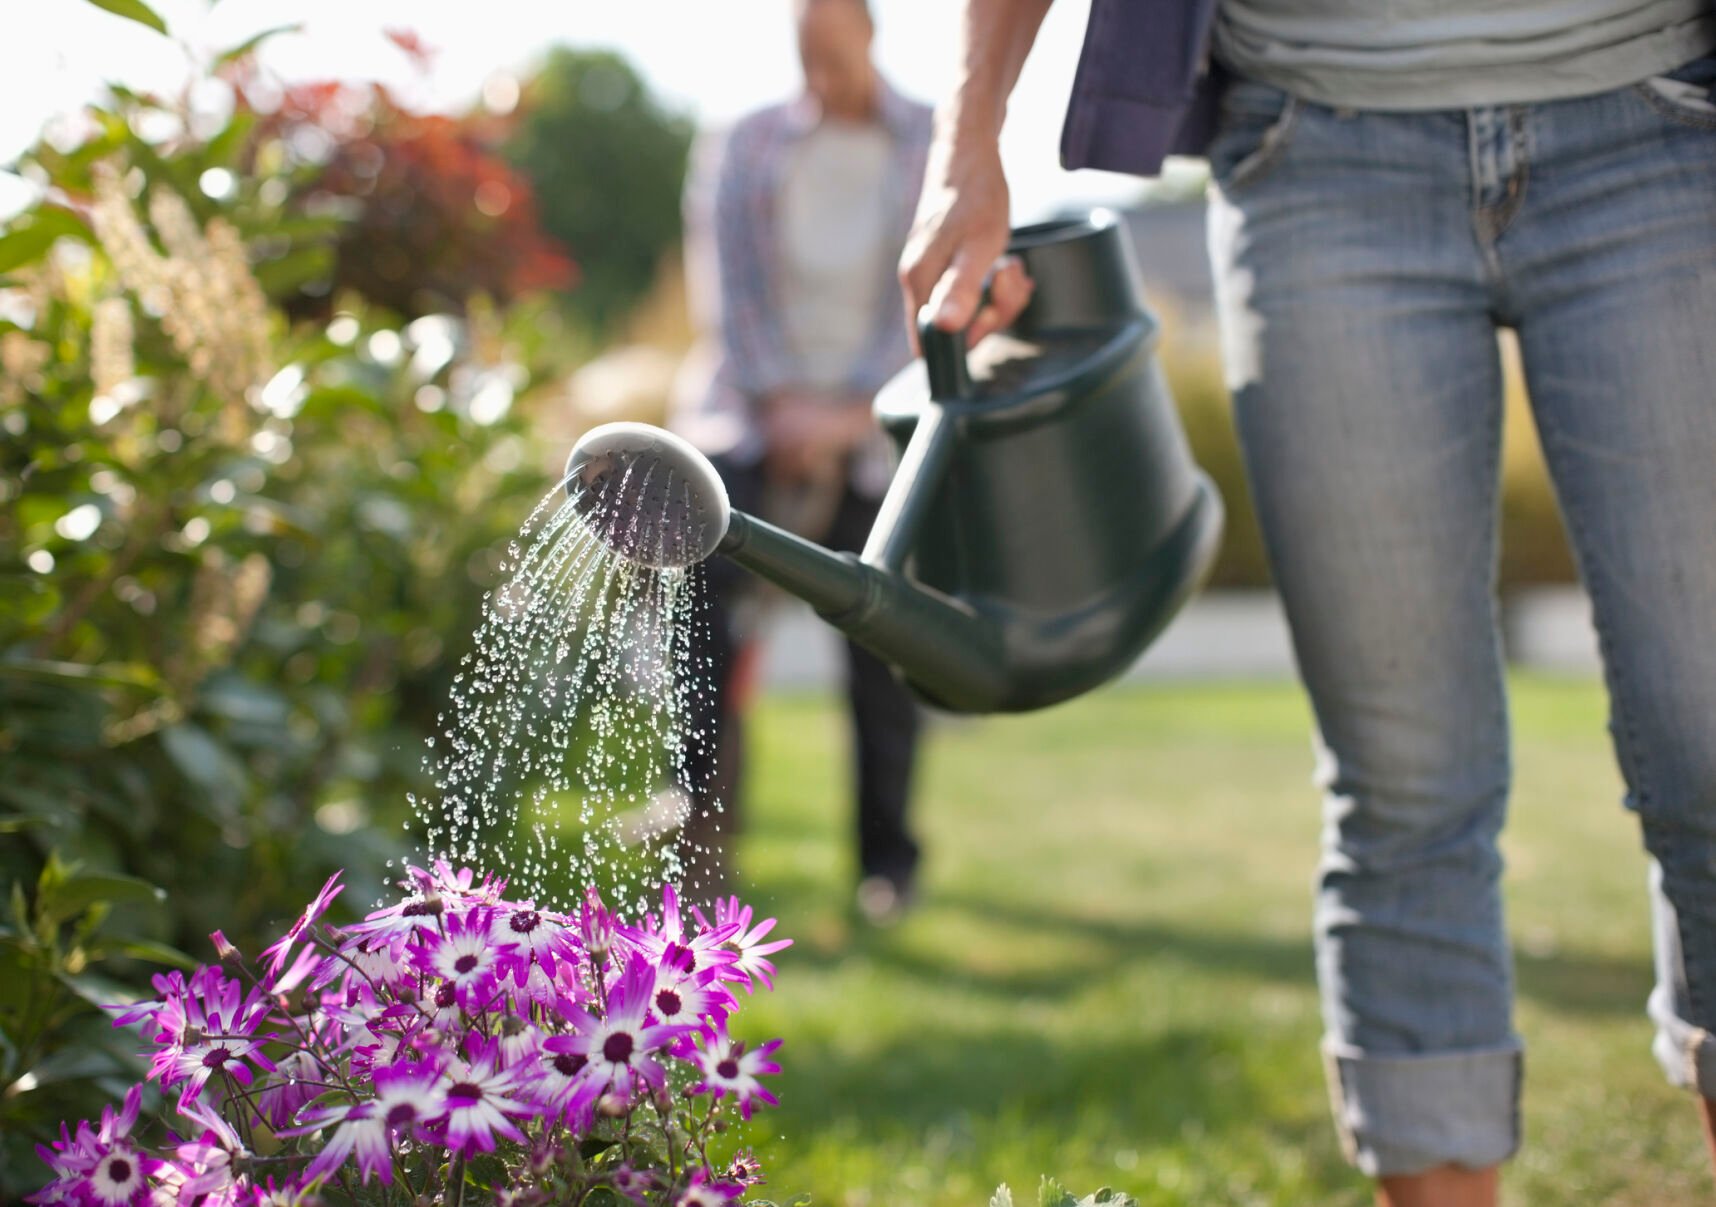 Everything you need to know about watering outdoor plants in the